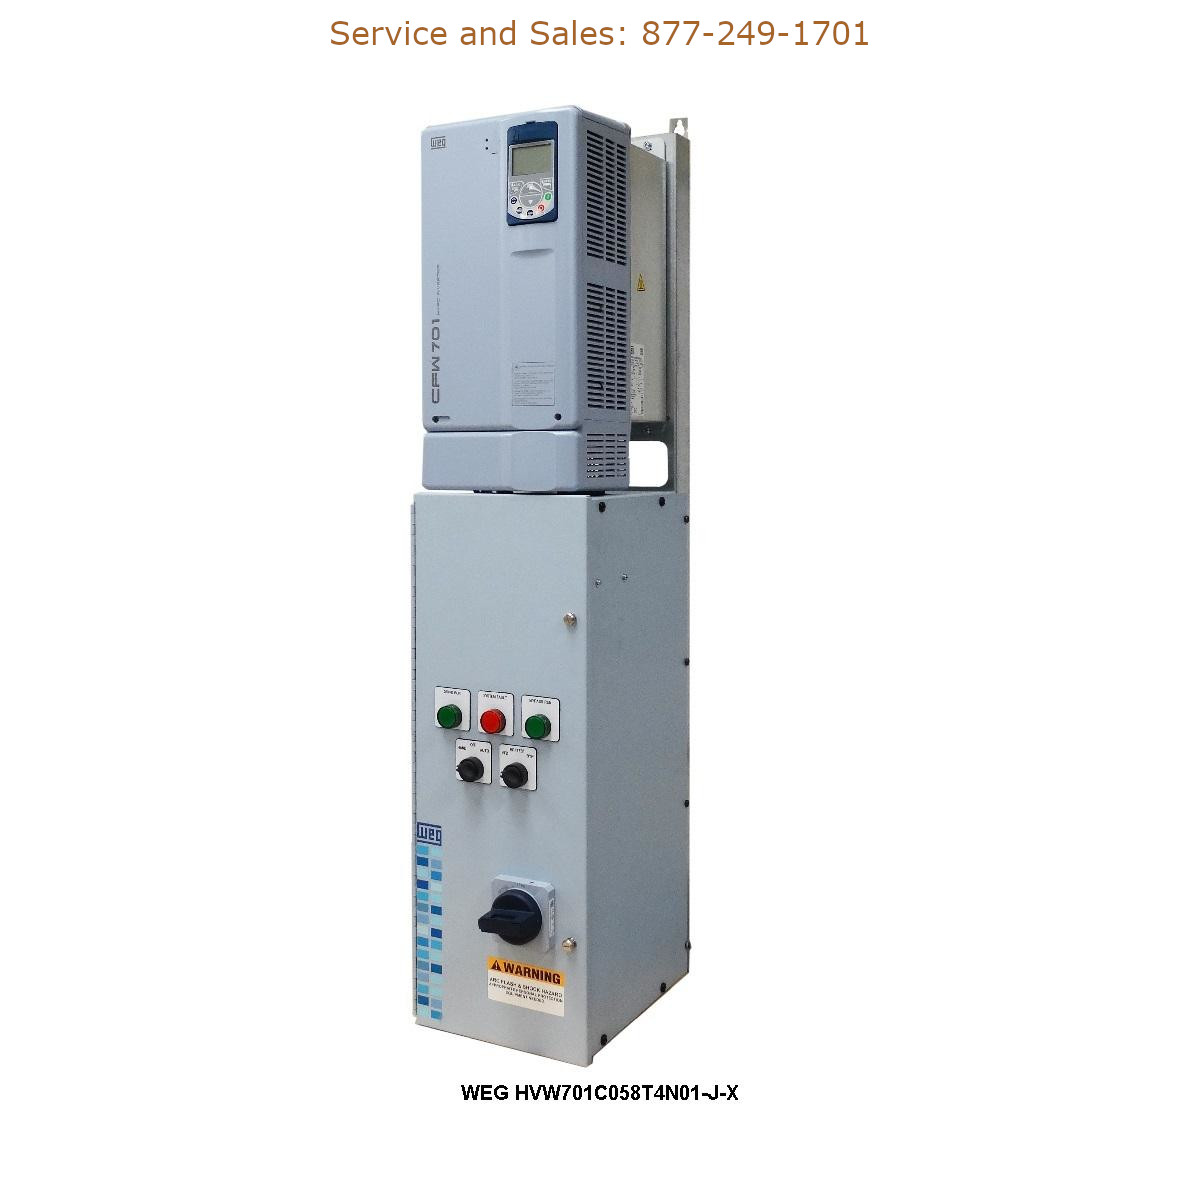 WEG HVW701C058T4N01-J-X WEG Model Number HVW701C058T4N01-J-X WEG Drives, Variable Speed Drives Repair Service, Troubleshooting, Replacement Parts https://gesrepair.com/wp-content/uploads/2022/WEG/WEG_HVW701C058T4N01-J-X_Drives_Variable_Speed_Drives.jpg